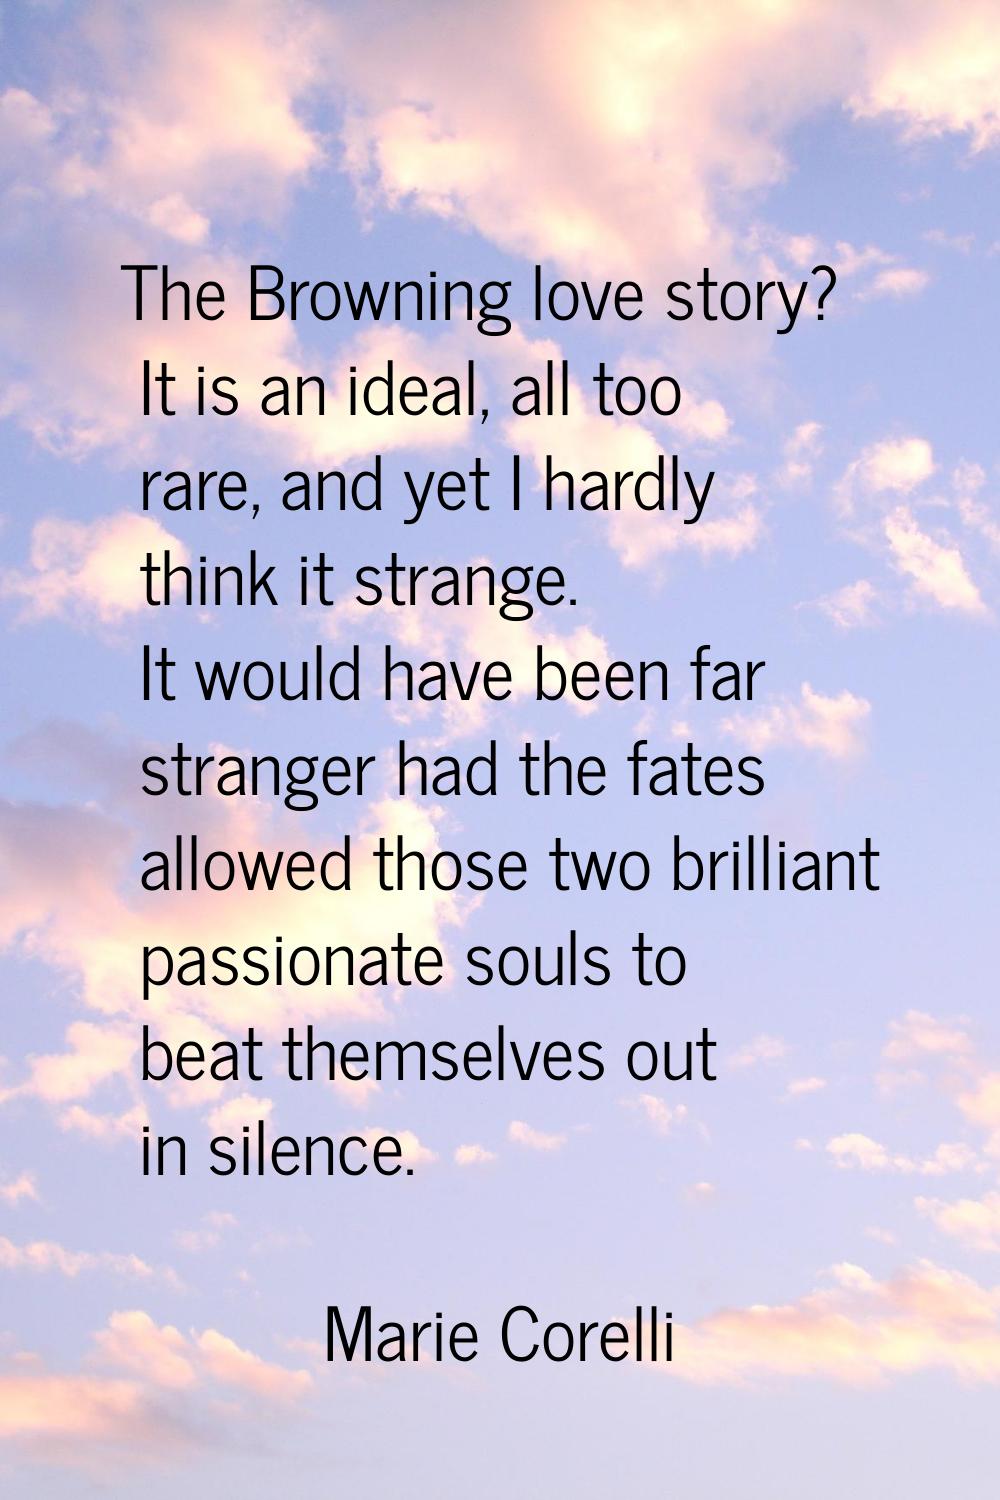 The Browning love story? It is an ideal, all too rare, and yet I hardly think it strange. It would 